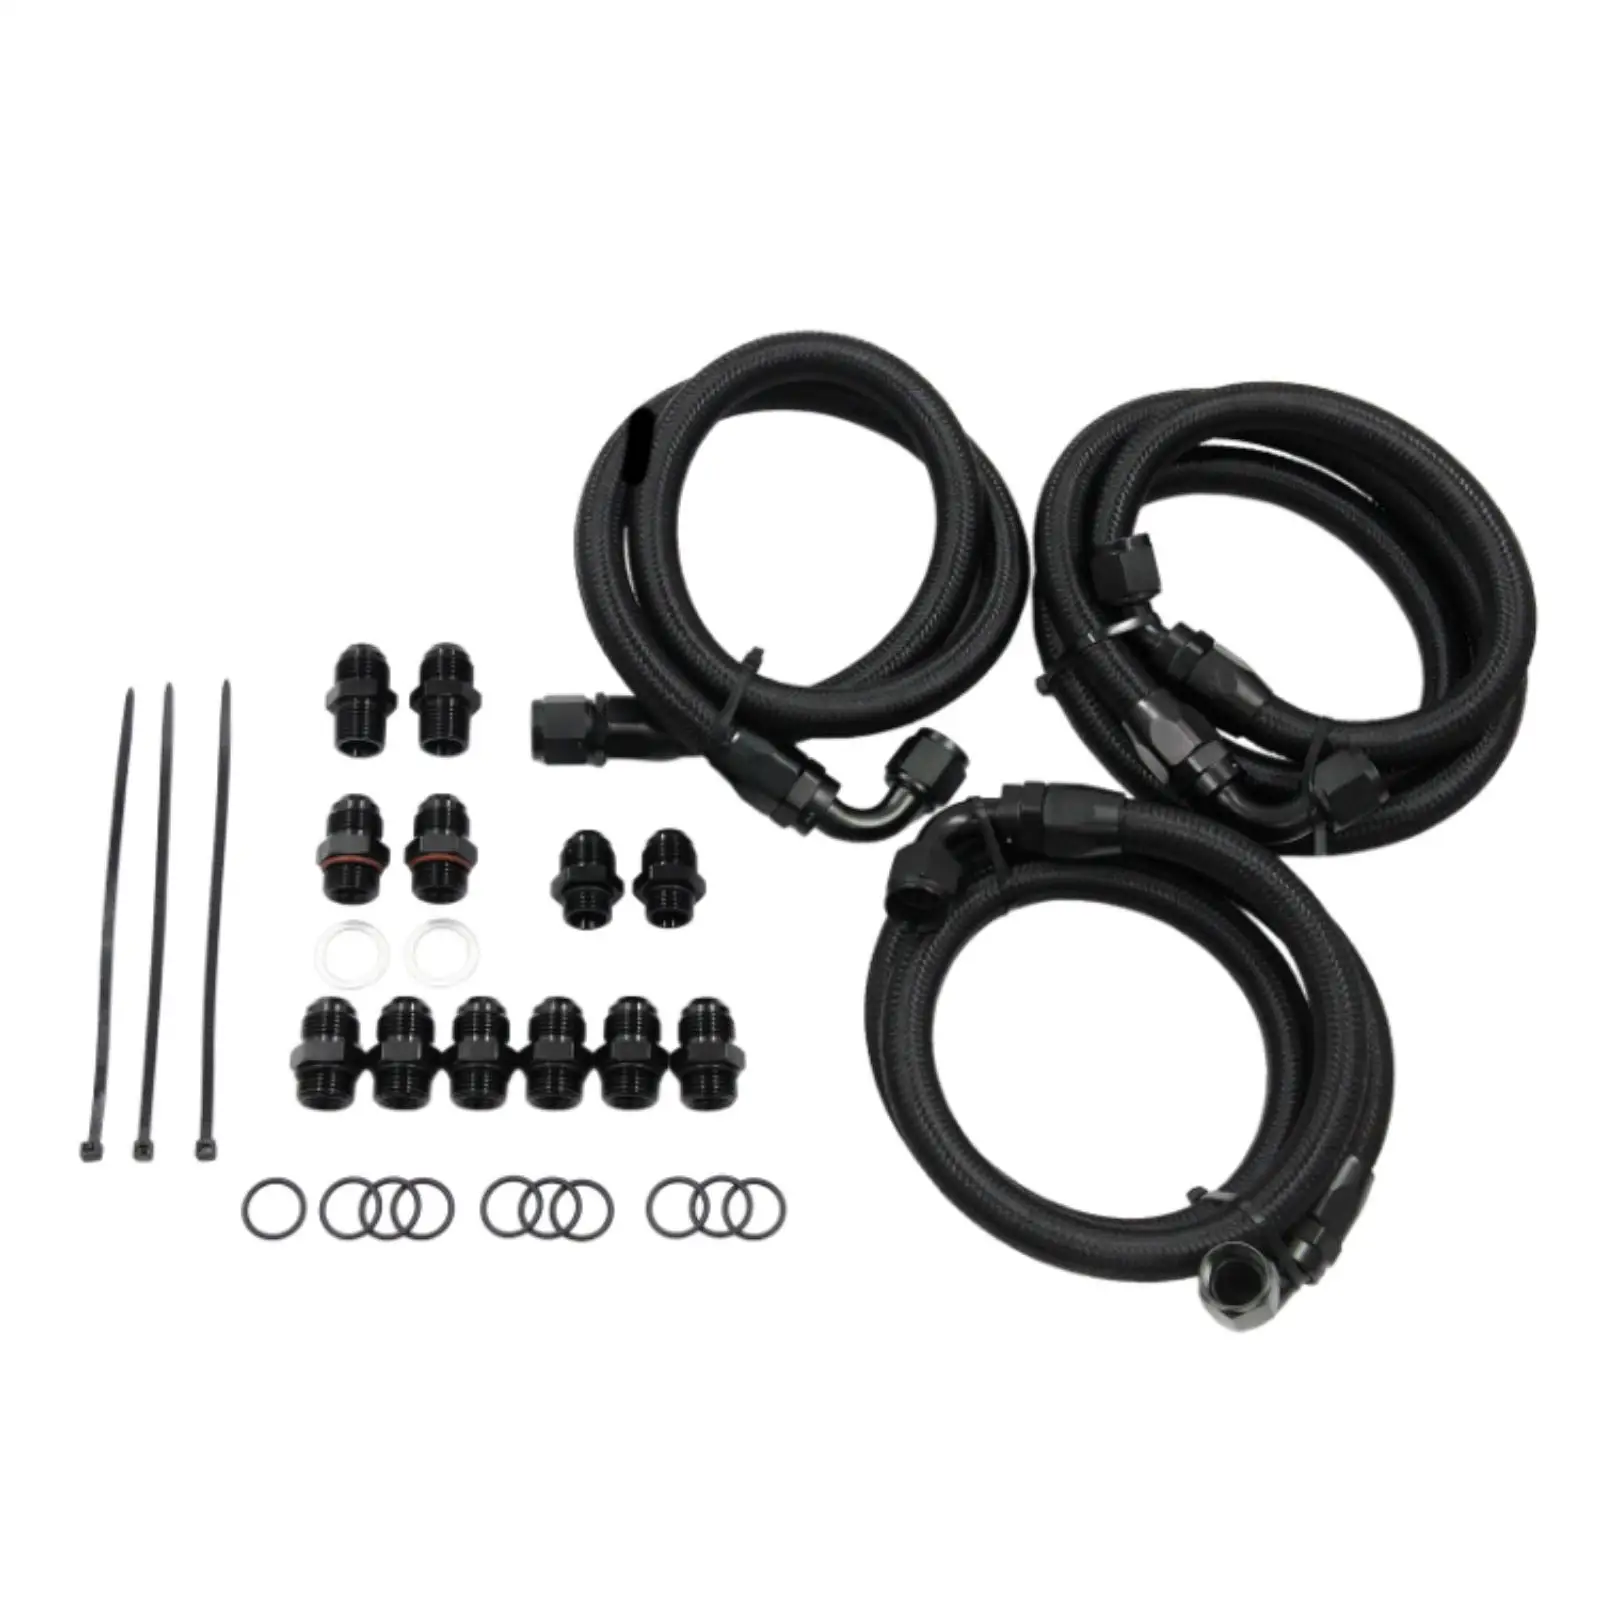 Transmission Cooler Lines Kit Heavy Duty High Performance Durable Metal for GM